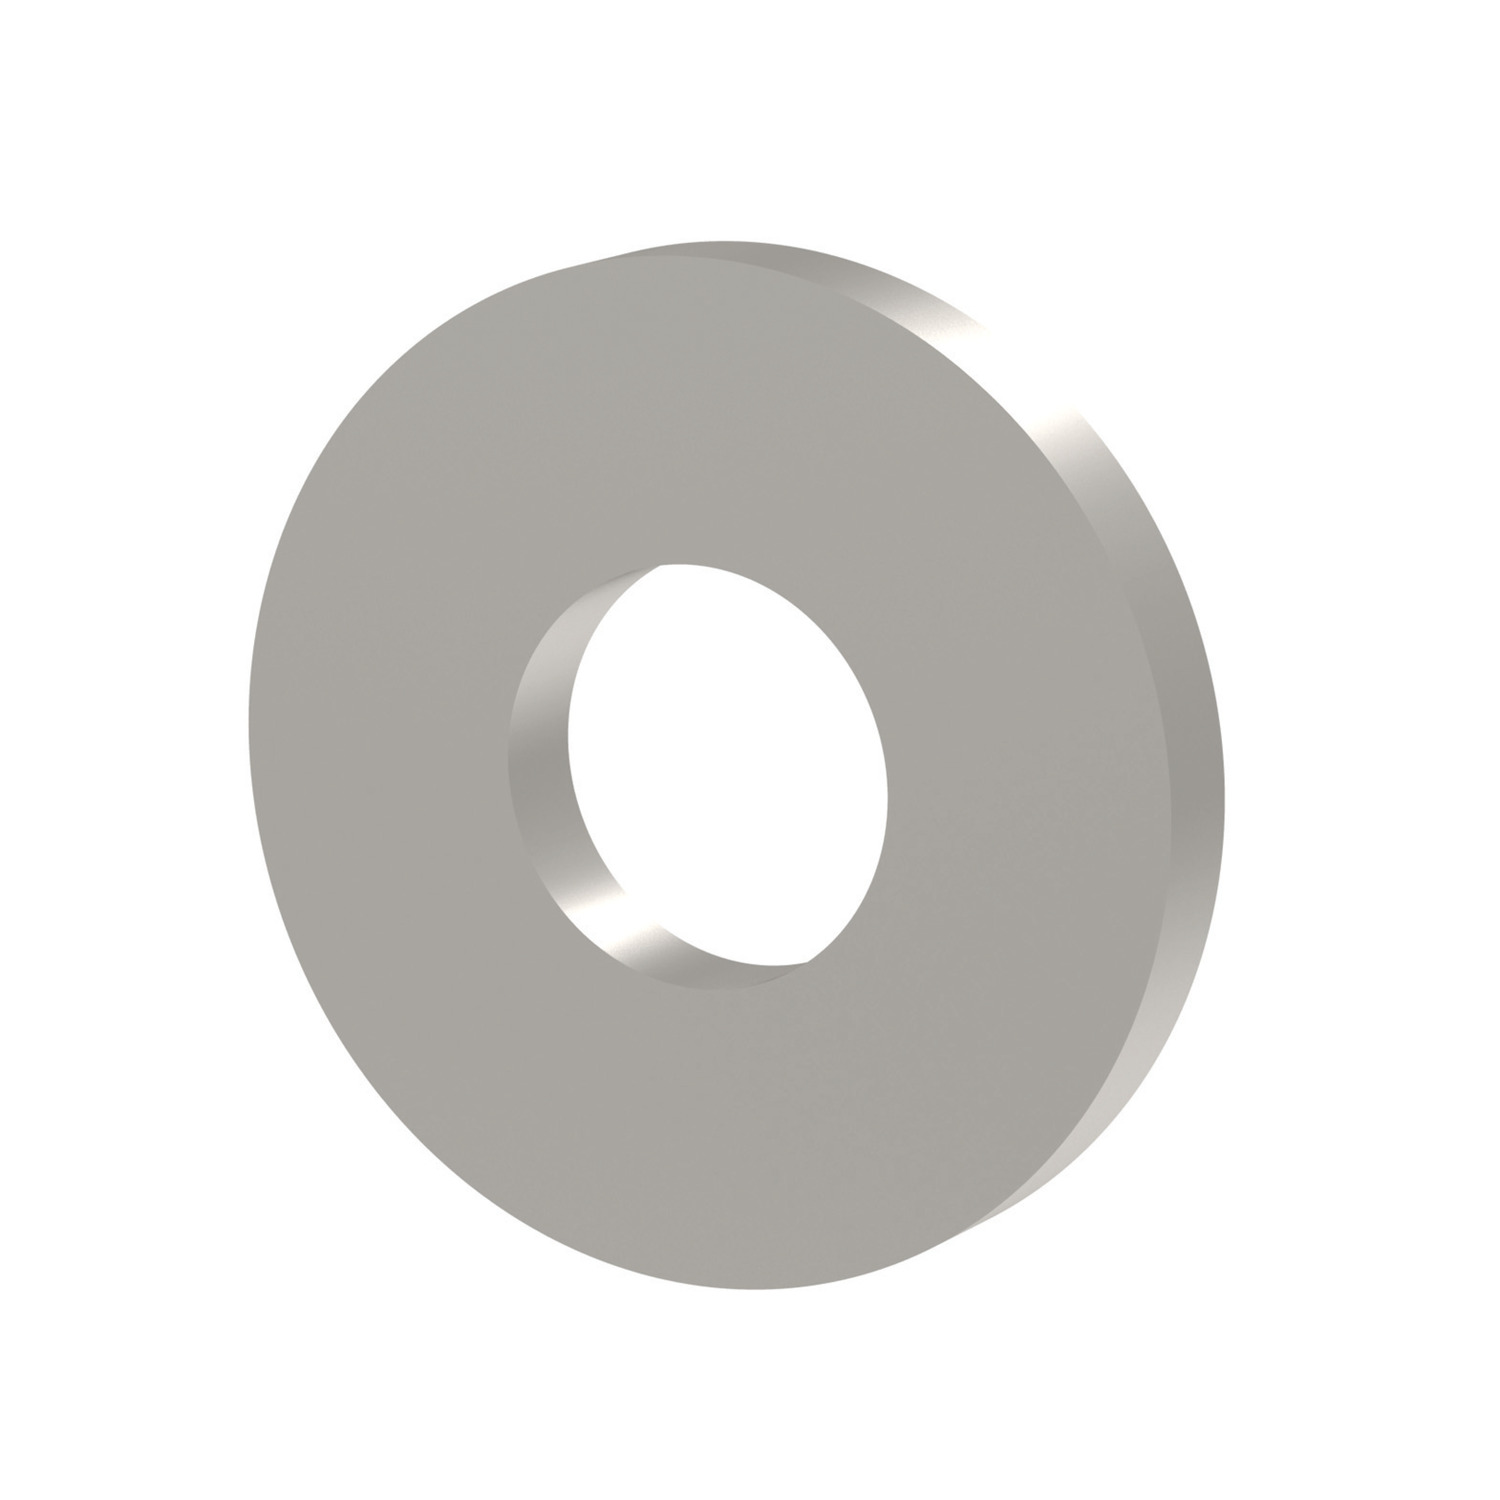 P0337.A4 - Large Diameter Washers